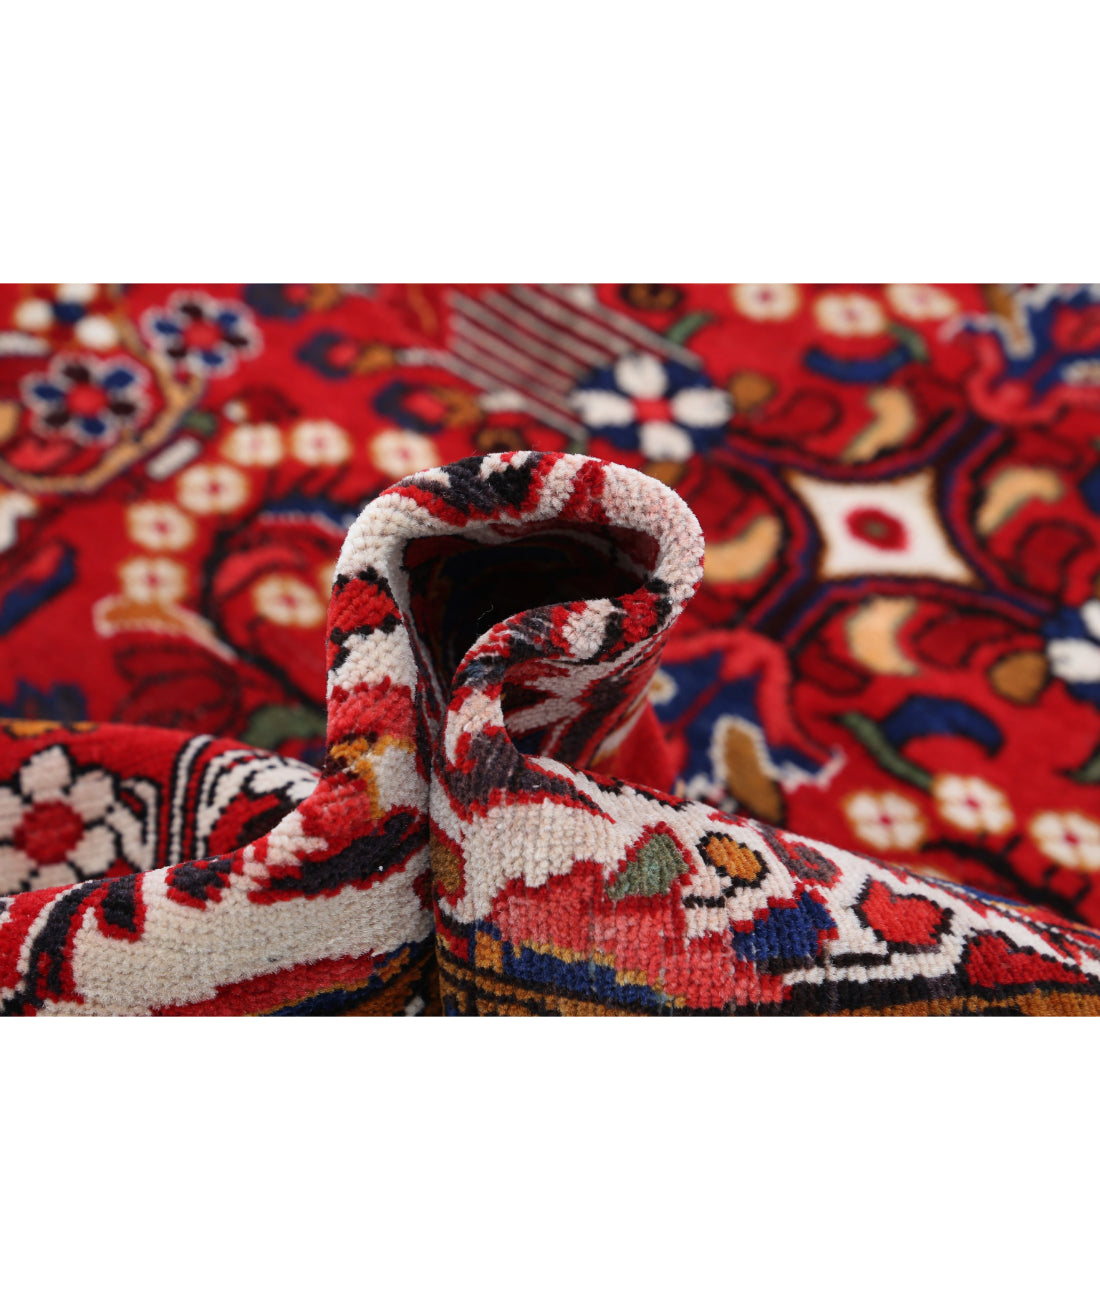 Hand Knotted Persian Hamadan Wool Rug - 4'9'' x 7'8'' 4'9'' x 7'8'' (143 X 230) / Red / Black